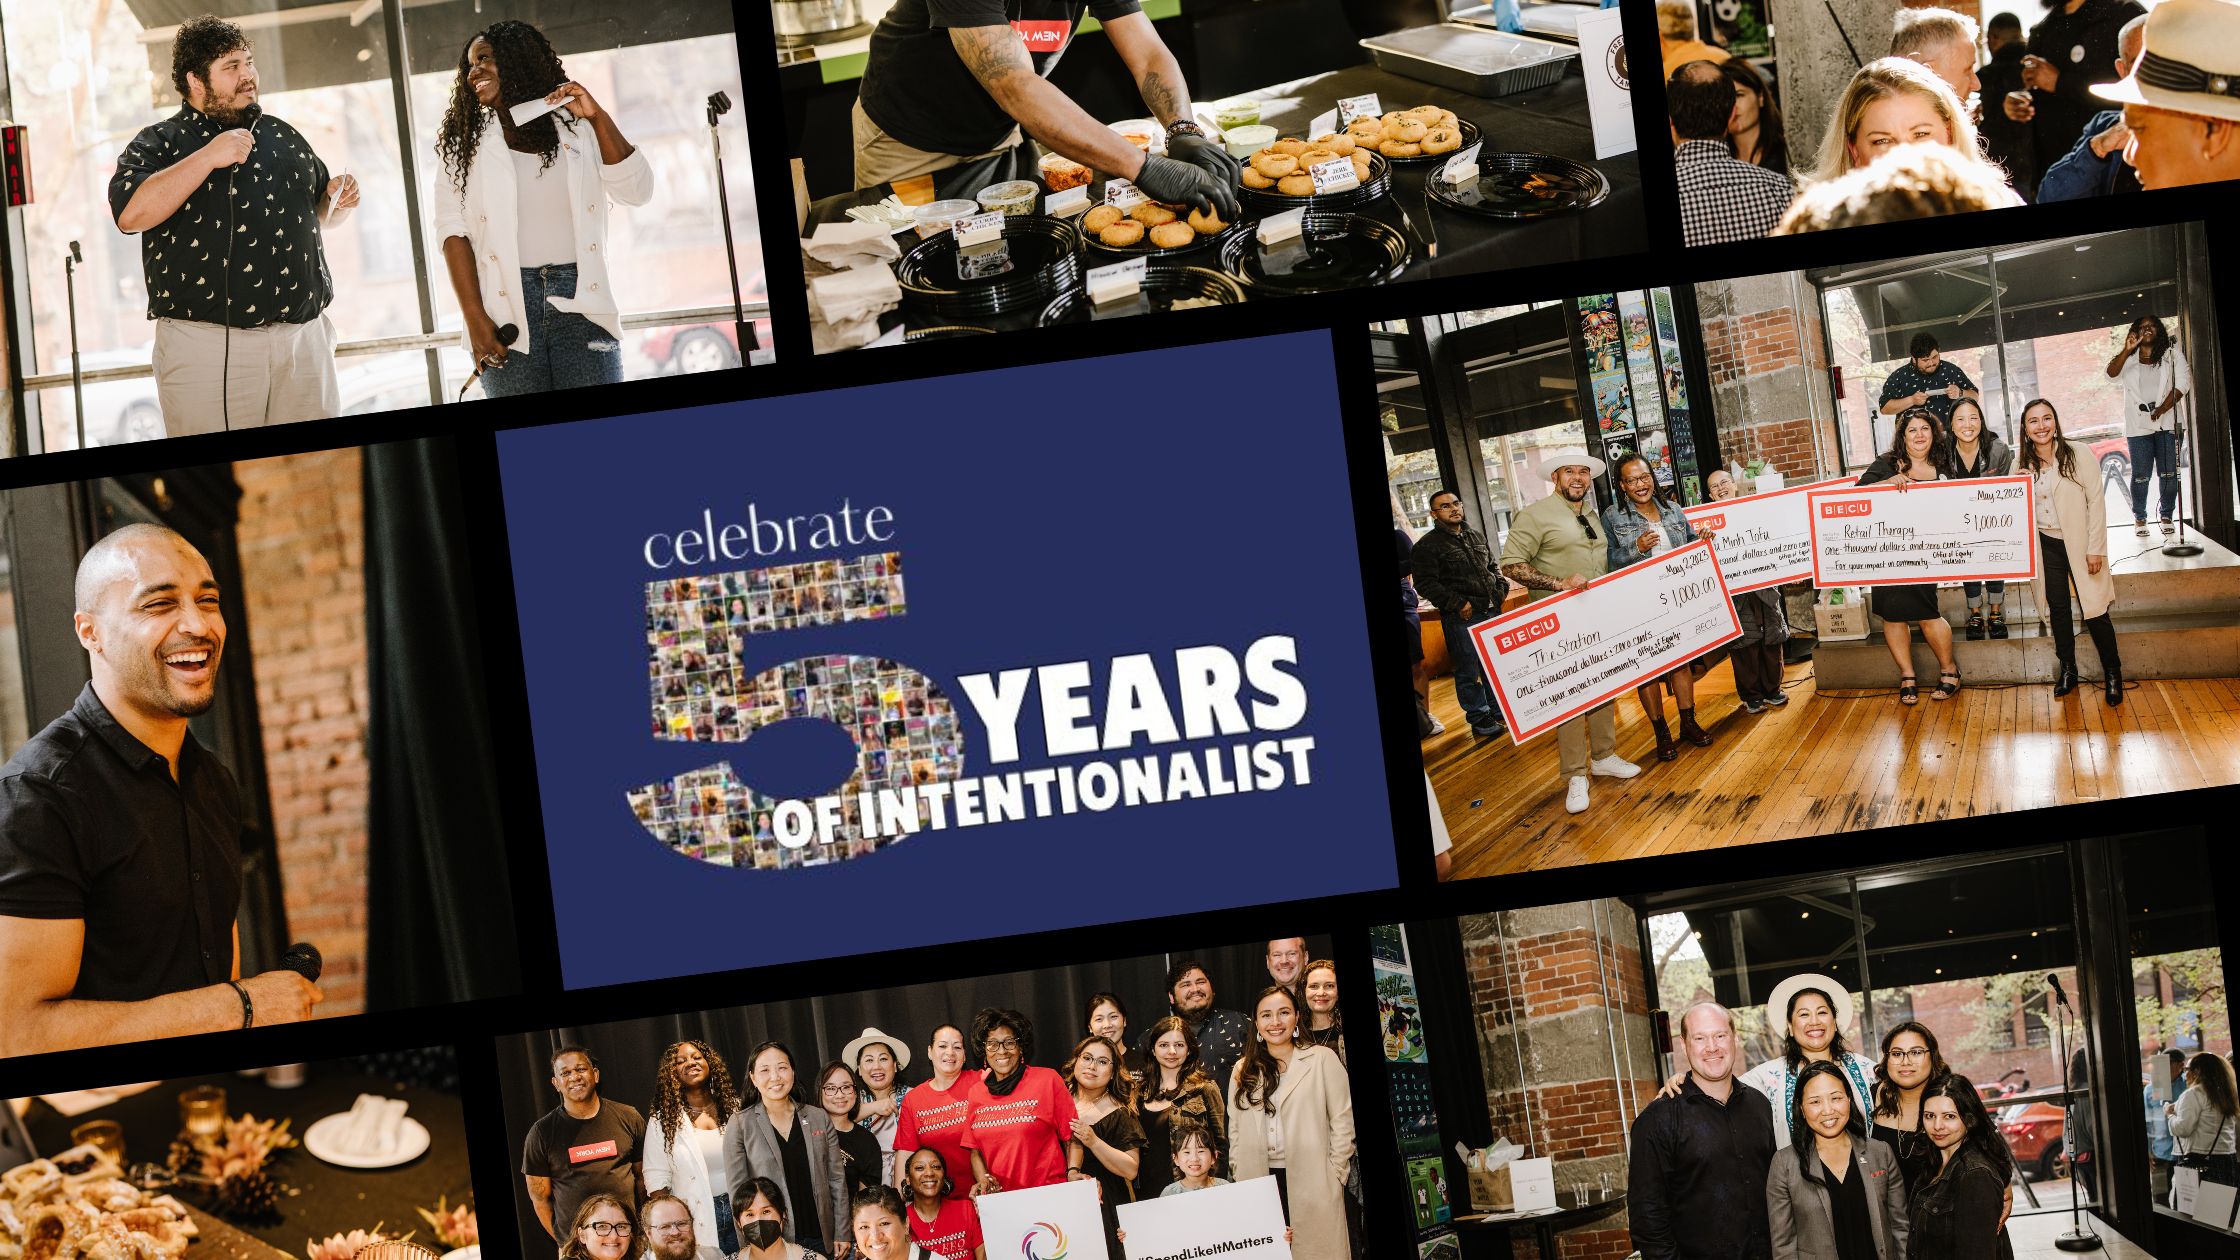 Cheers to 5 Years: A Look Back at Intentionalist's Anniversary Celebration